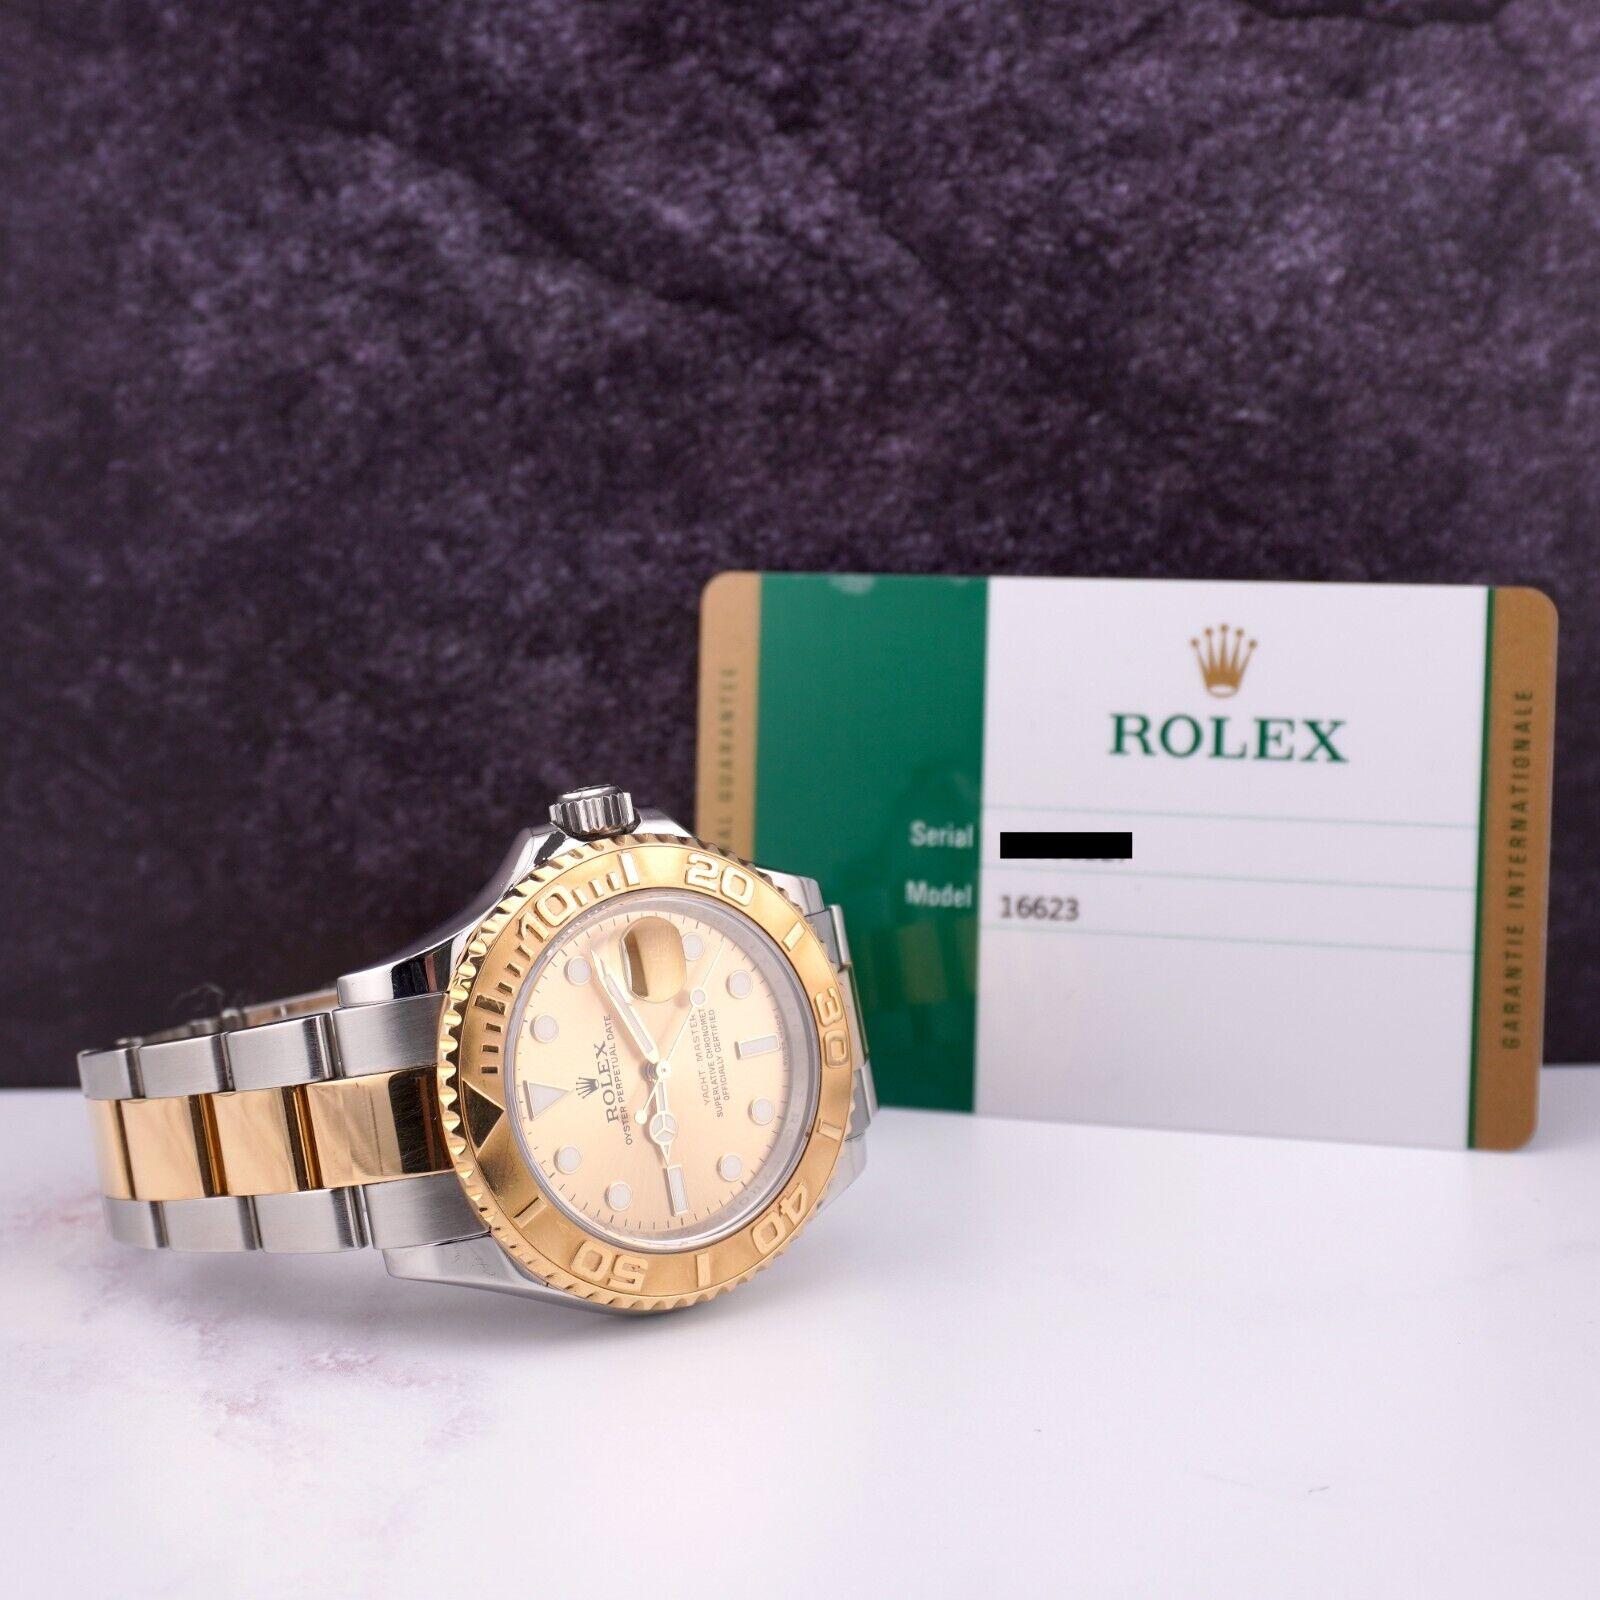 Rolex Yacht-Master 40mm Oyster Date 18k Yellow Gold & Steel Watch Dial 16623 For Sale 4